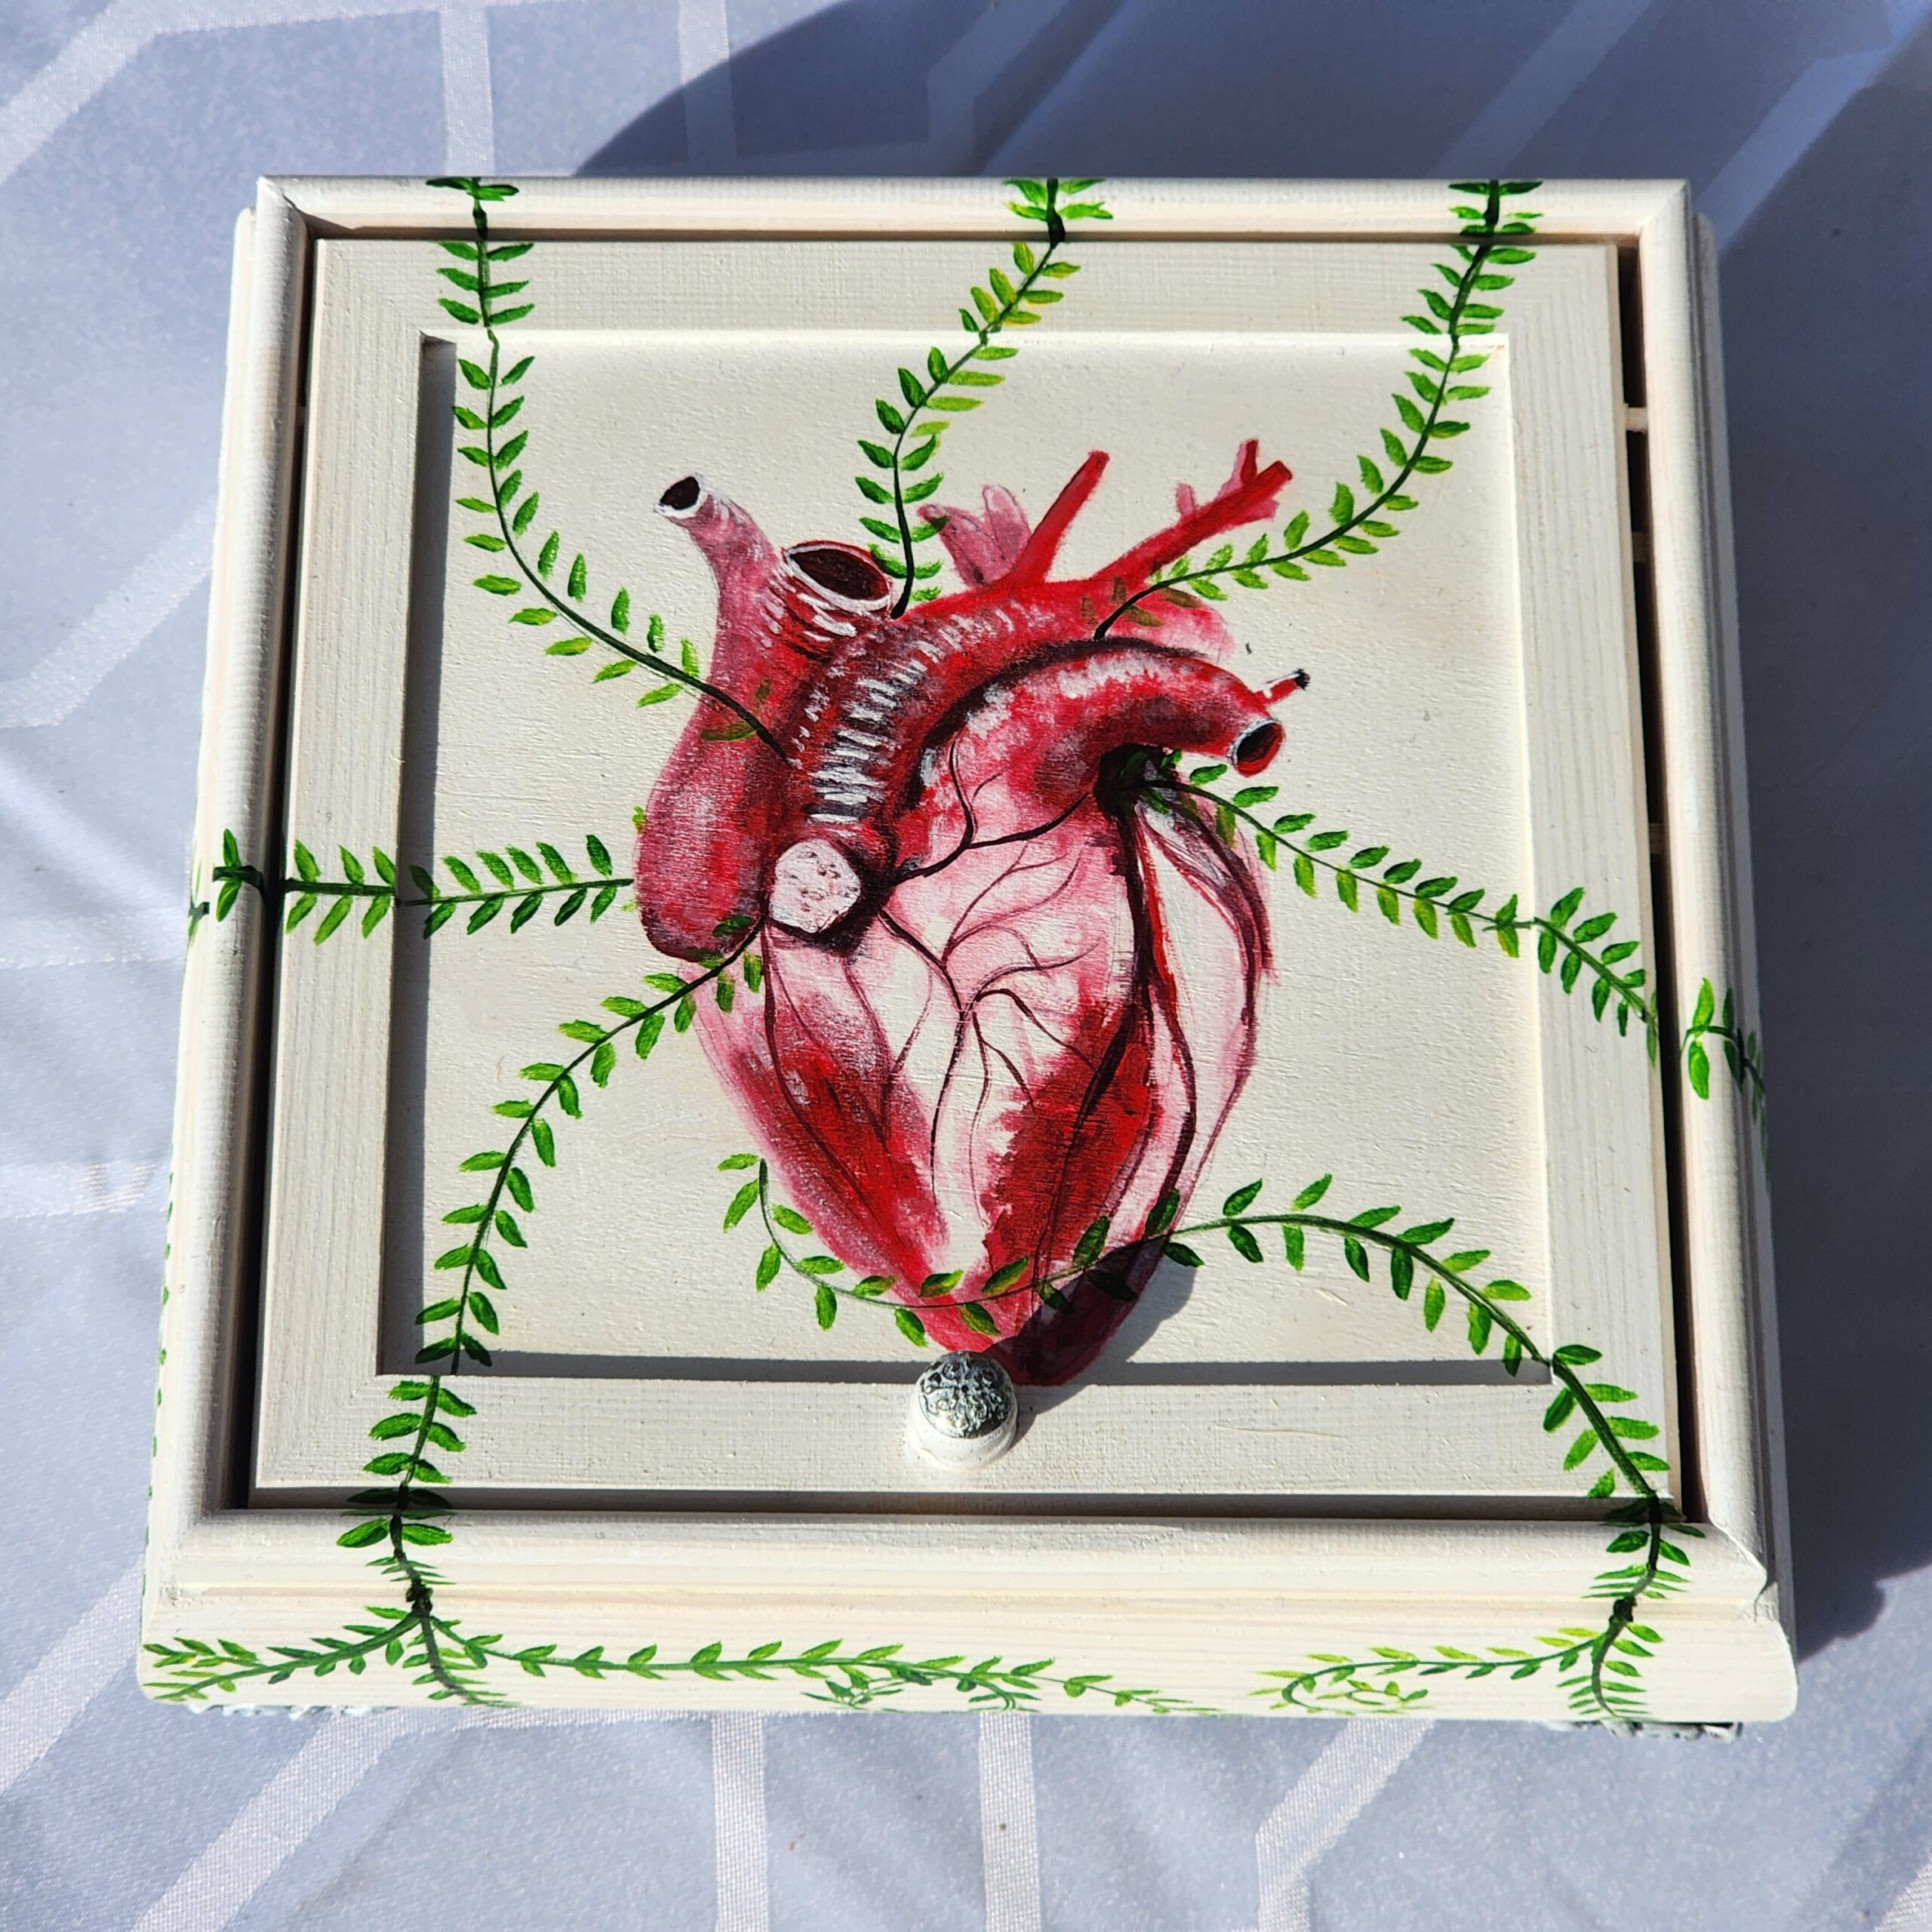 Beautiful handpainted wooden trinket box with a mirror and metal feet. This cute heart trinket box is an ideal gift for a special loved one. You can store jewelry such as rings, necklaces, bracelets, or anything you would like to keep in a particular place, especially in this elegant and artistic trinket box.